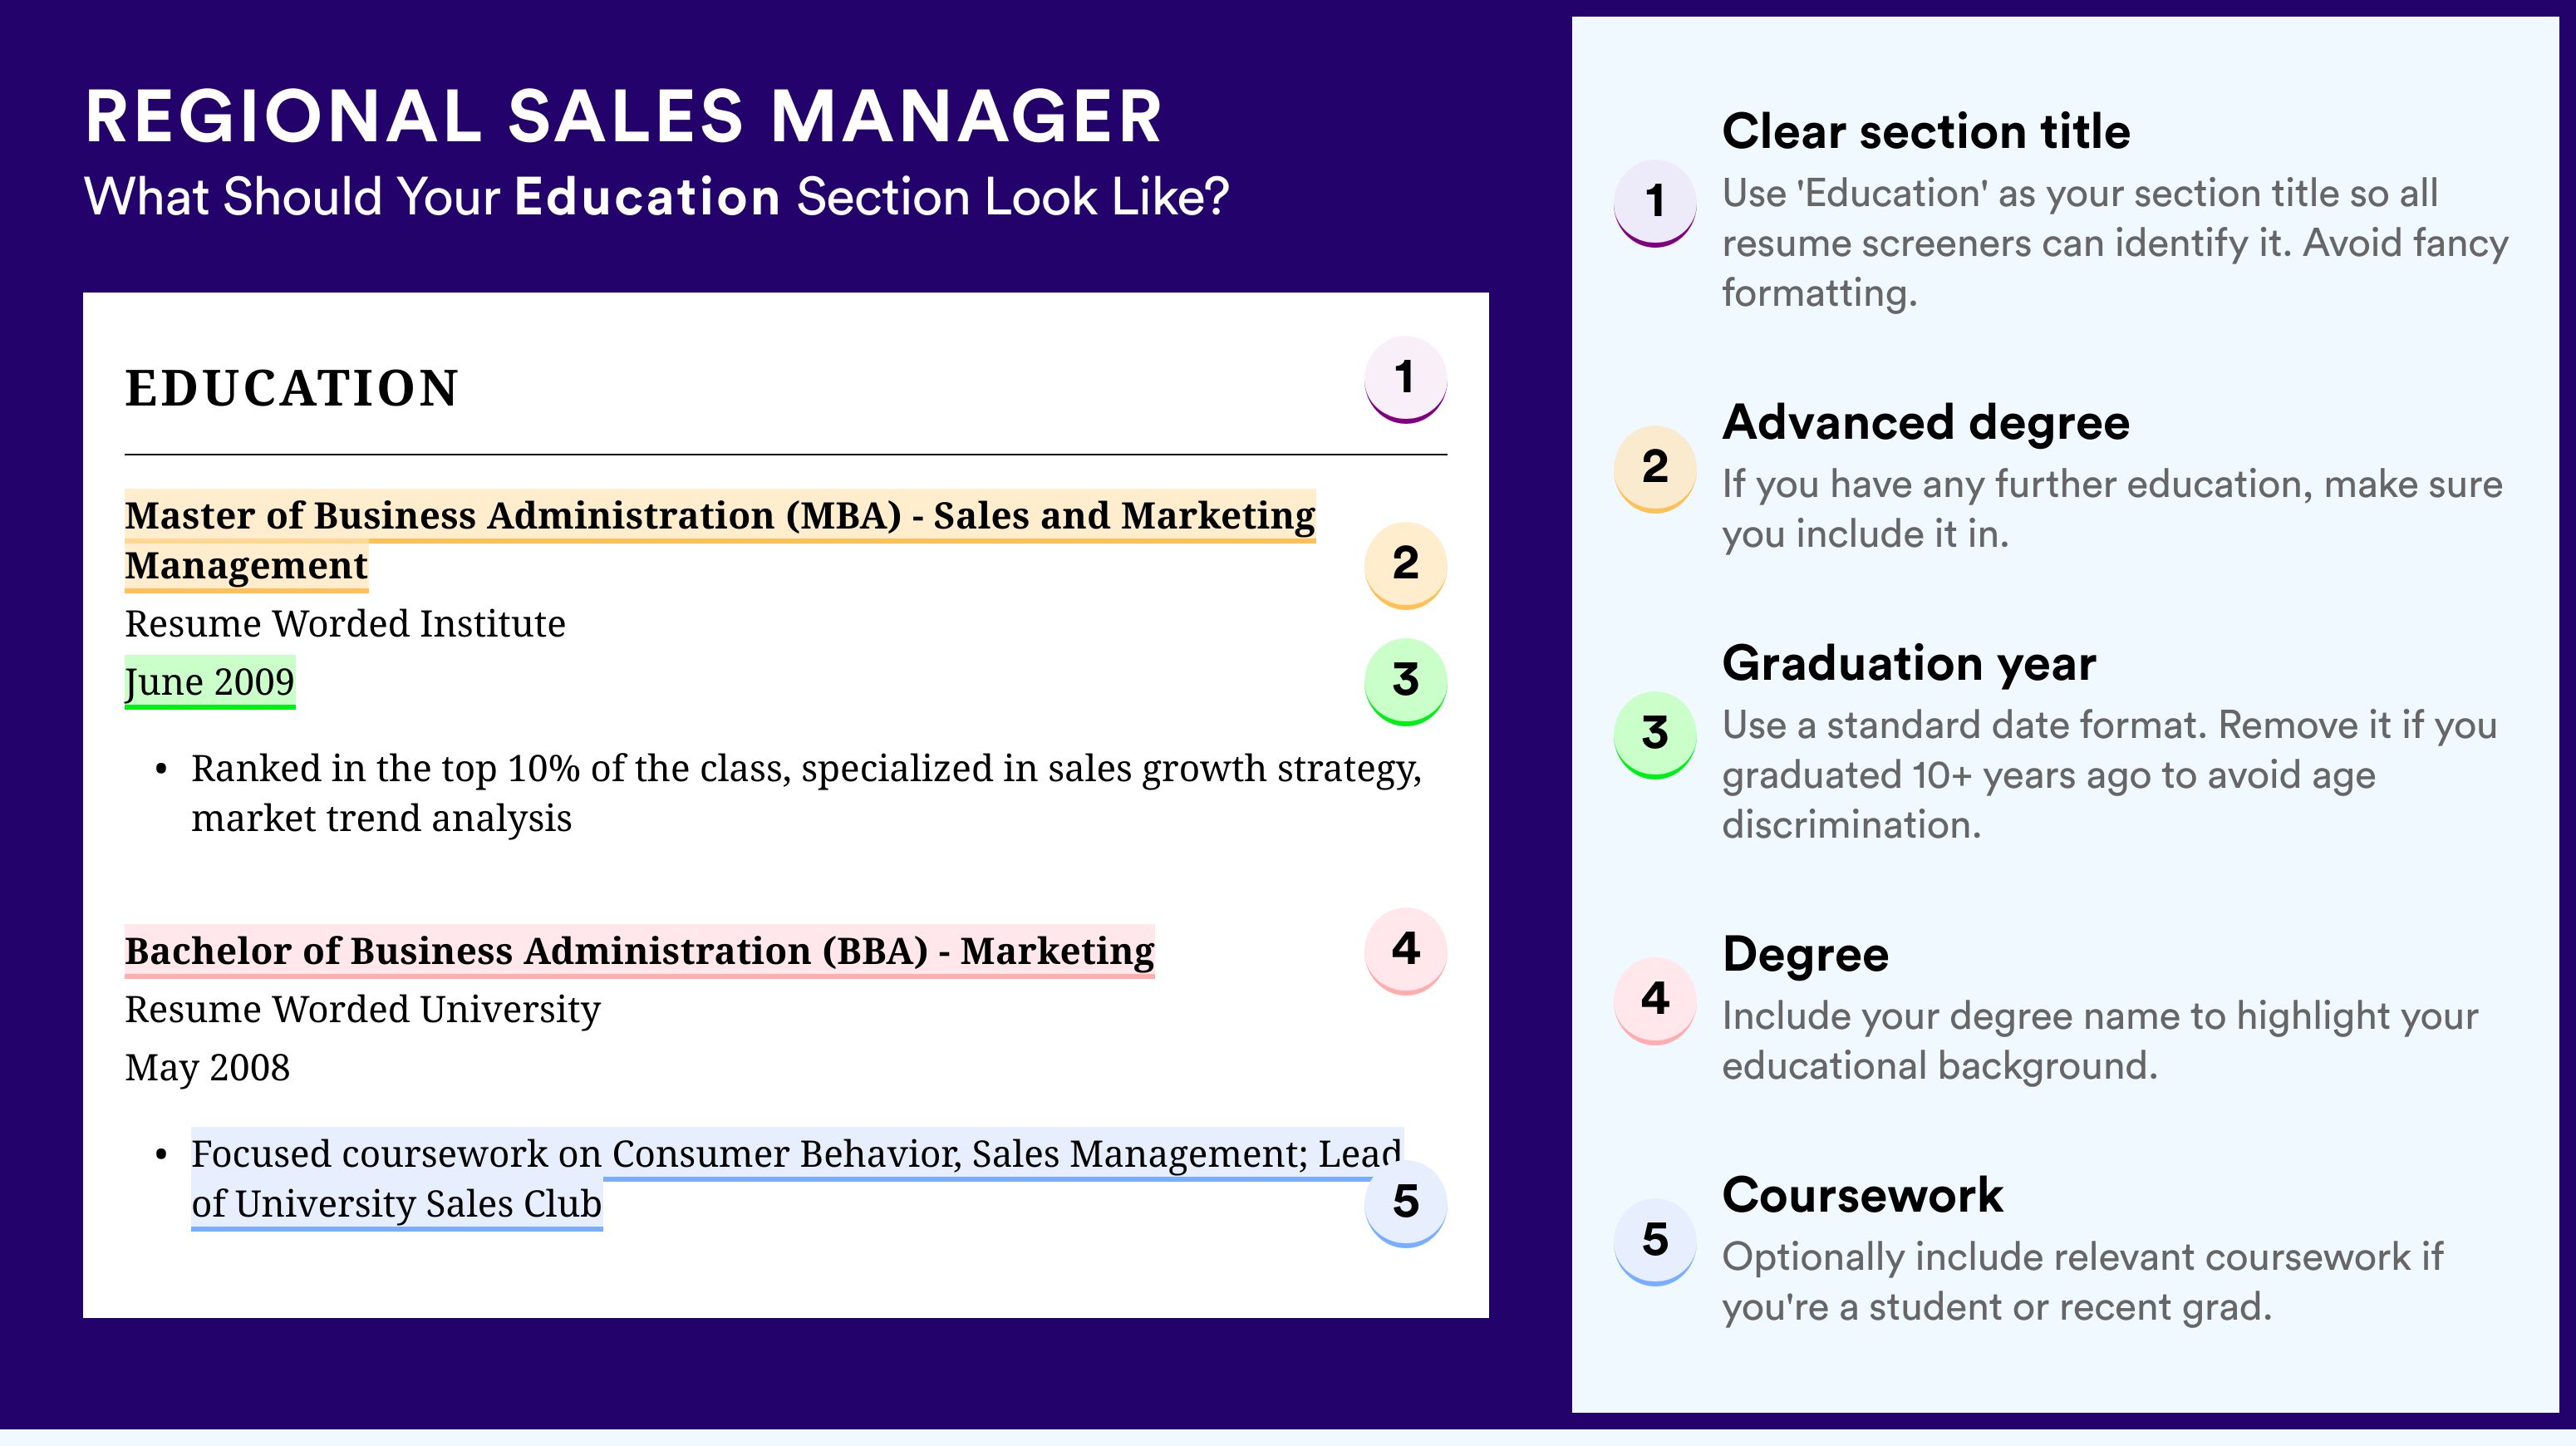 How To Write An Education Section - Regional Sales Manager Roles